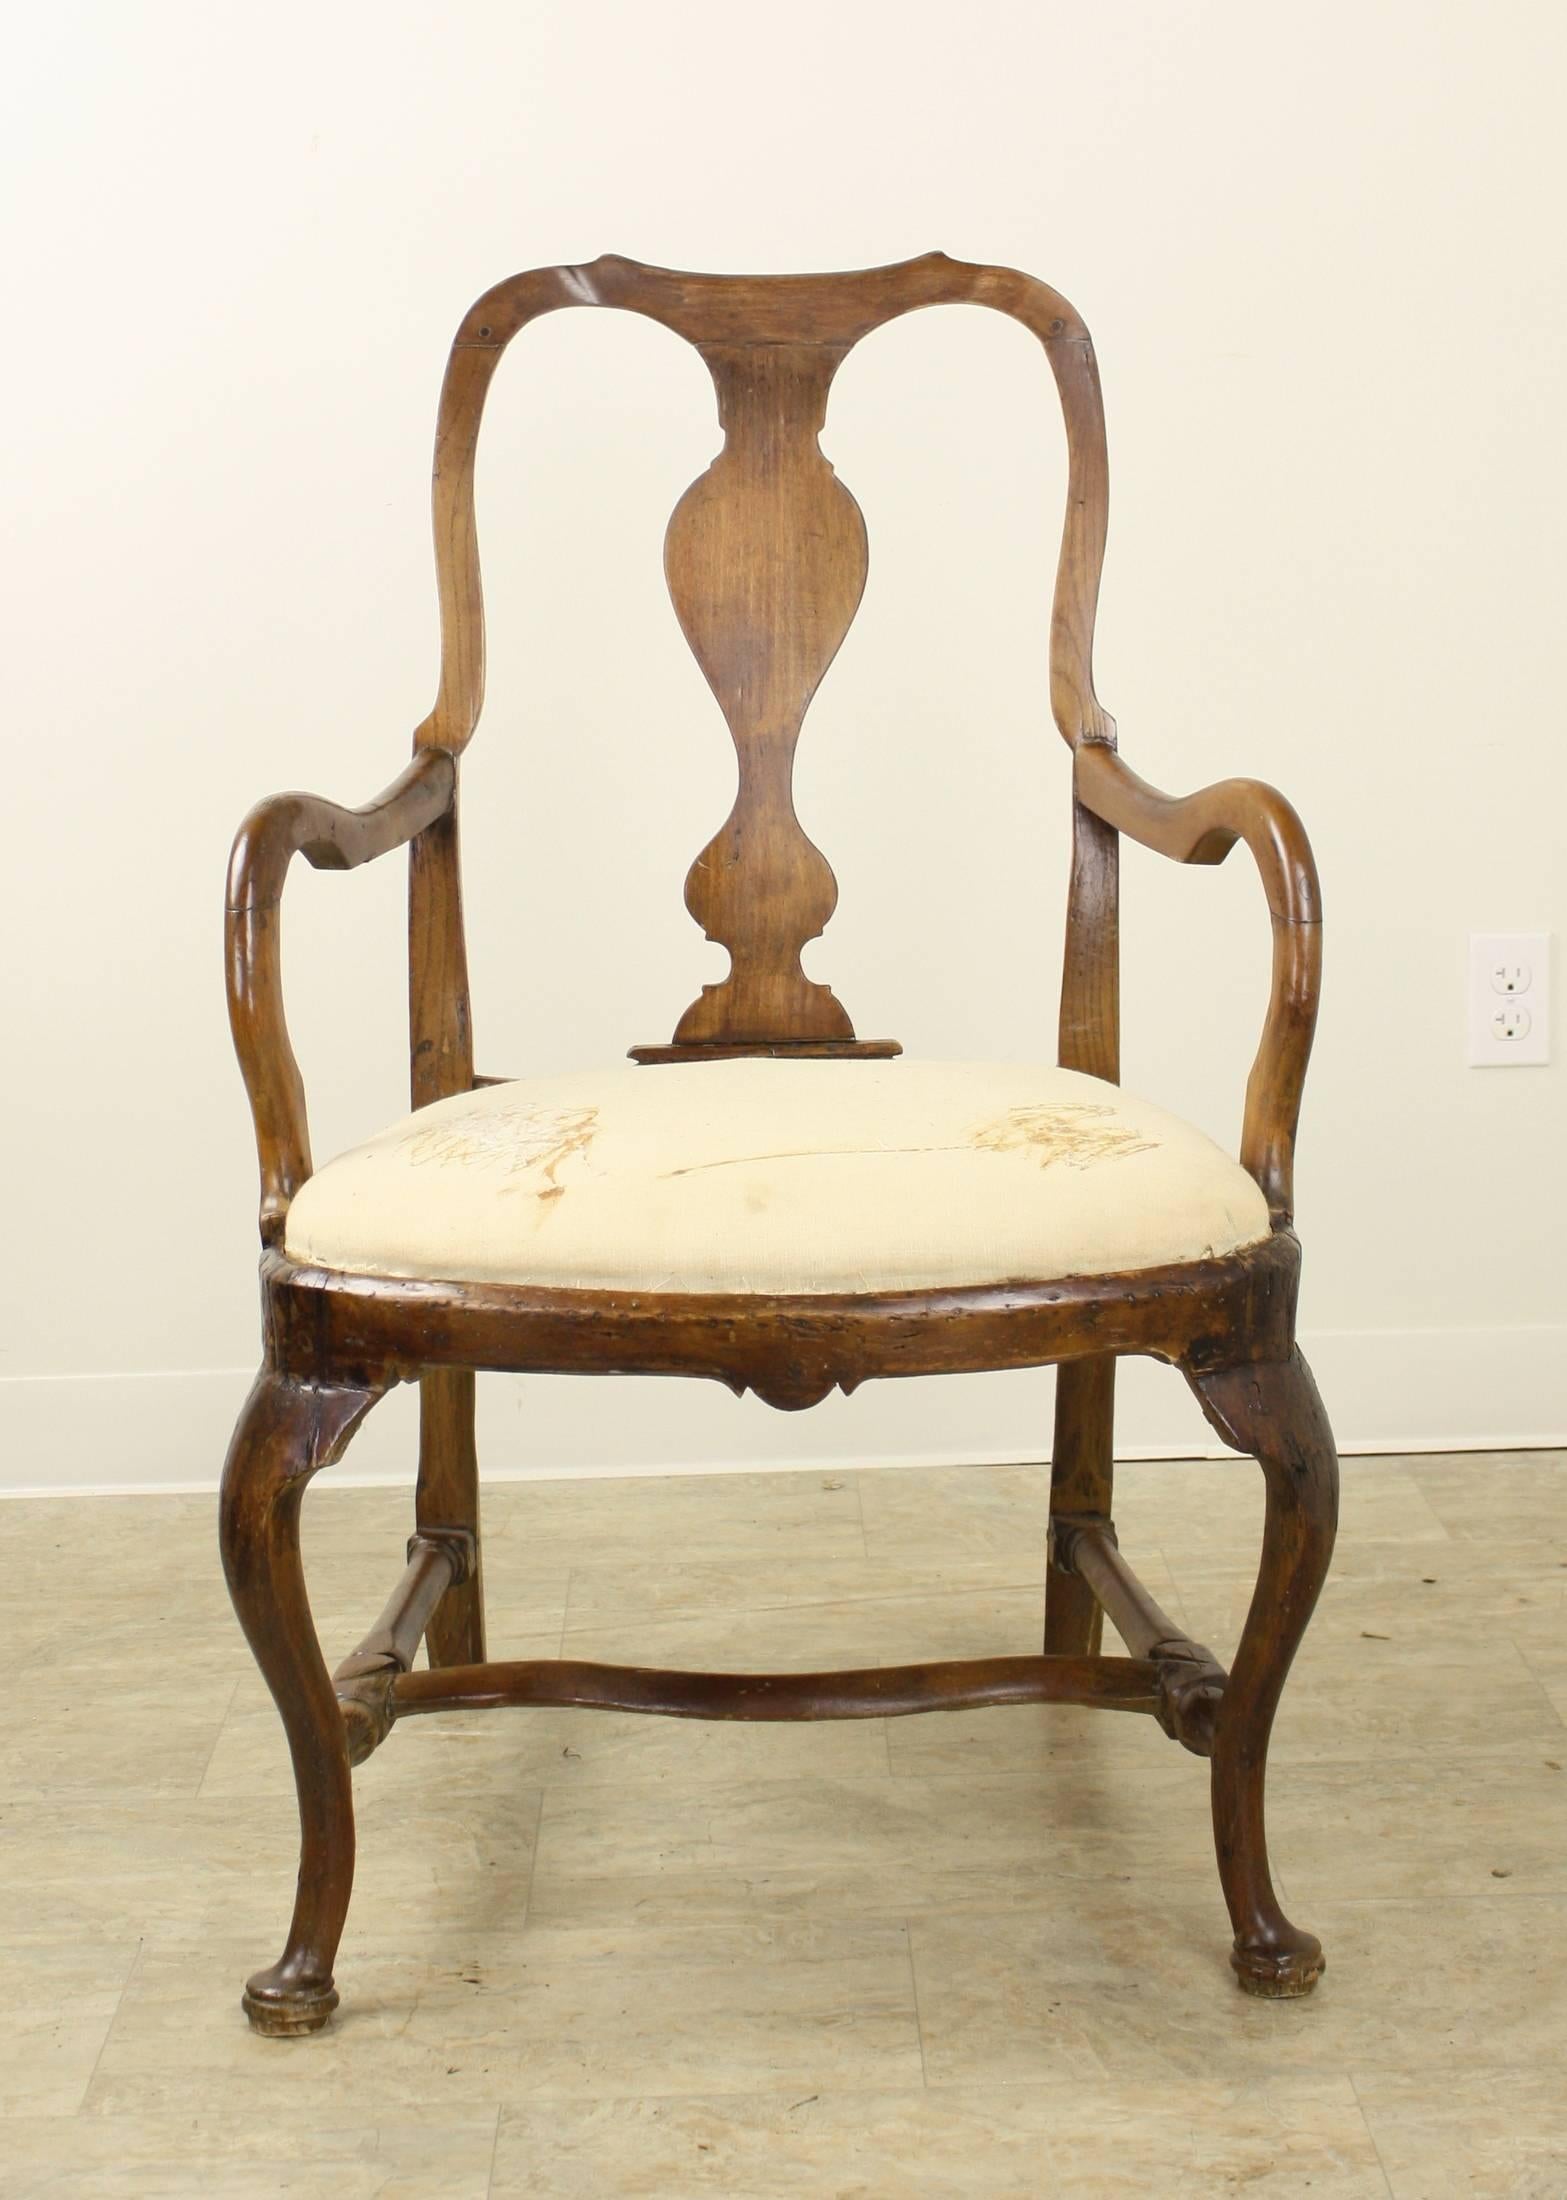 A glorious chair, it is perfection in its gracious and elegant lines. So clearly handmade, every line of this beautiful profile is gentle yet strong and beautifully shaped. The rich color and patina are exemplary and the fine base with the shaped